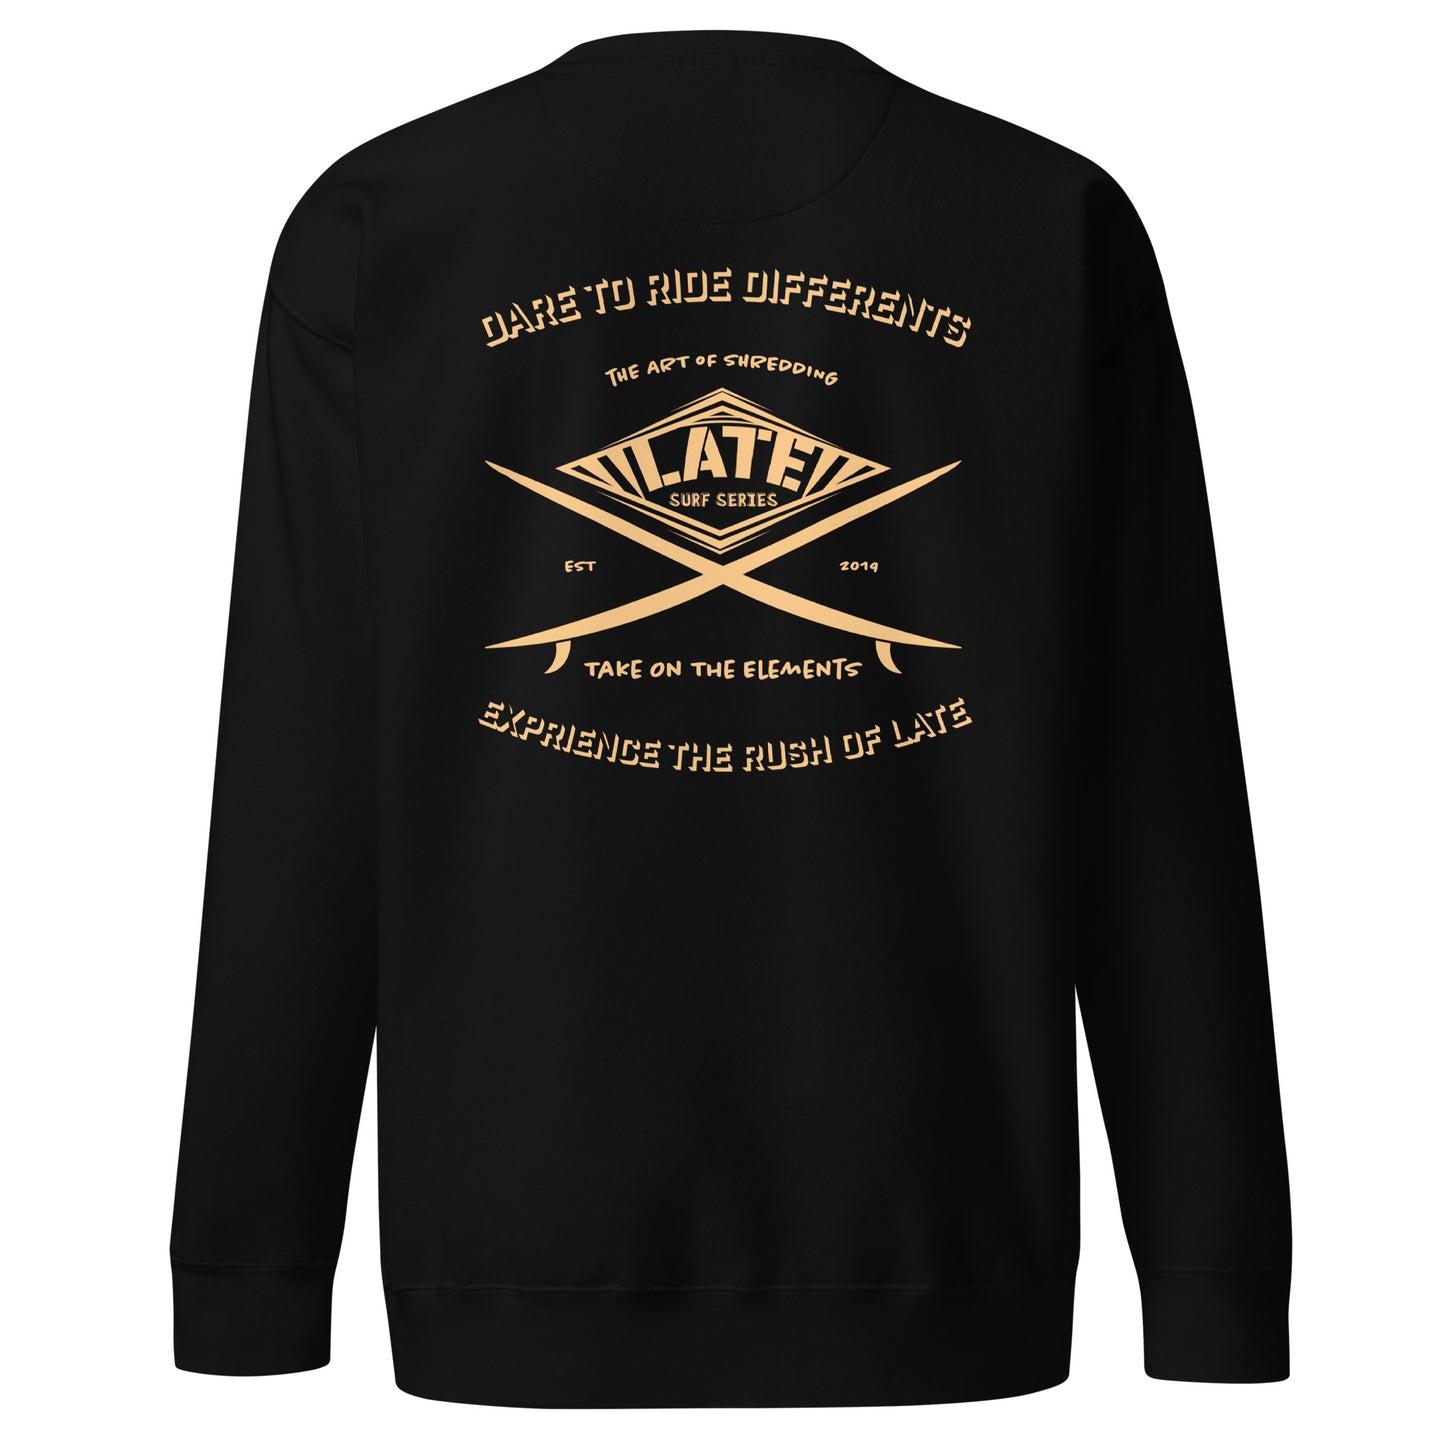 Sweatshirt surfboard dare to ride differents Take On The Elements experience the rush with Late de dos unisex couleur noir